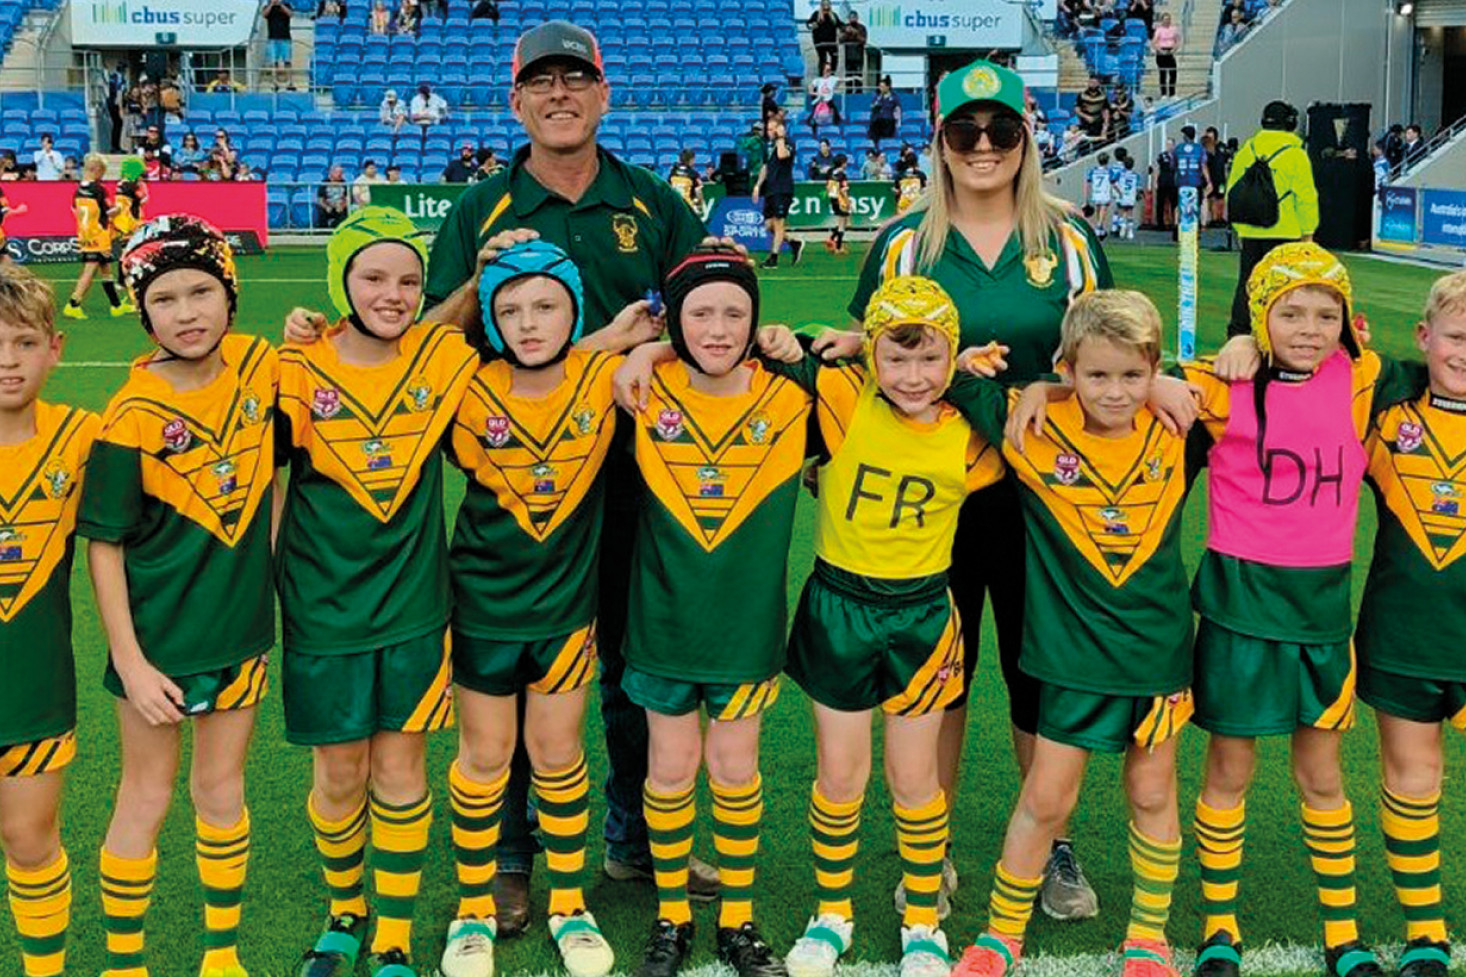 Wattles Under 9 team who played at Cbus Super Stadium on Sunday on the program with the Gold Coast Titans v North Queensland Cowboys NRL clash. Left to right: James Patterson, Oliver Willett, Jackson Wilson, Chaz Daley, Buddy Turner, Leo Williams, Henry Ferguson, Kit Gilmore, Jay Townsend. (Image: Shadai Daley)